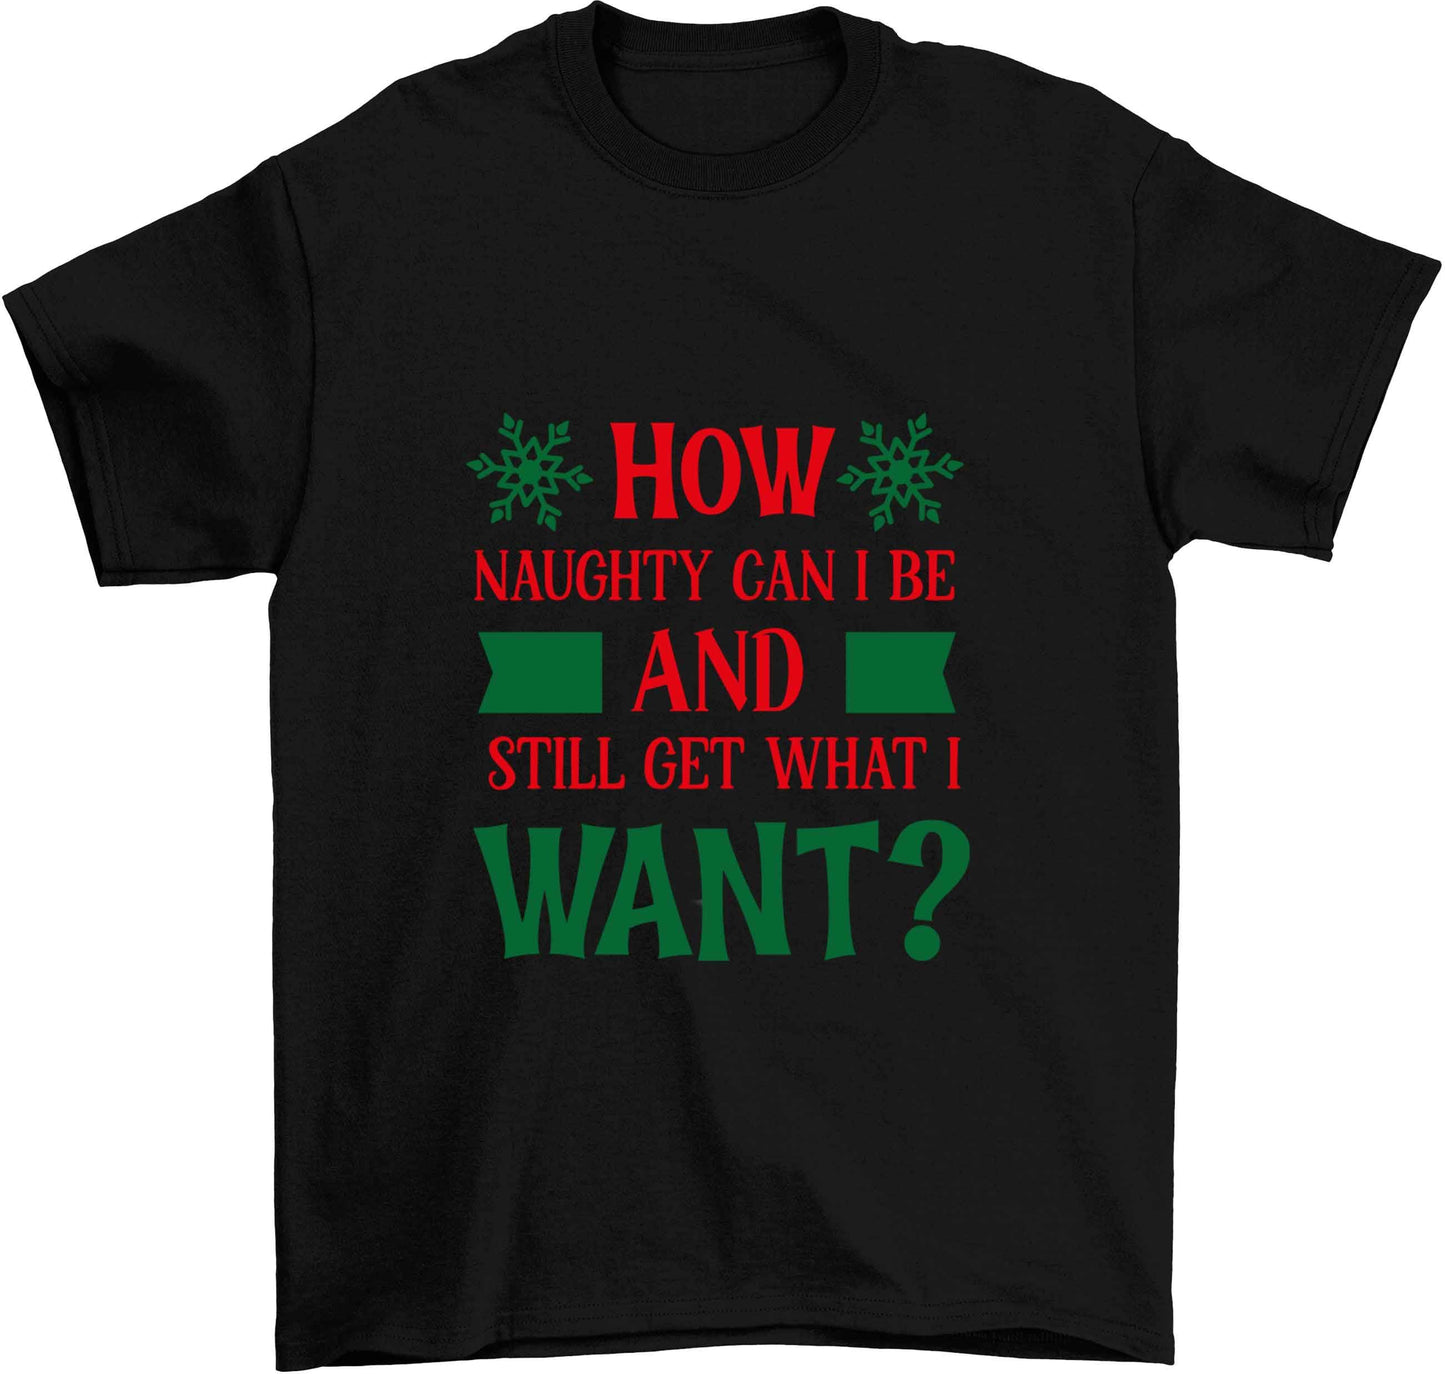 How naughty can I be and still get what I want? Children's black Tshirt 12-13 Years